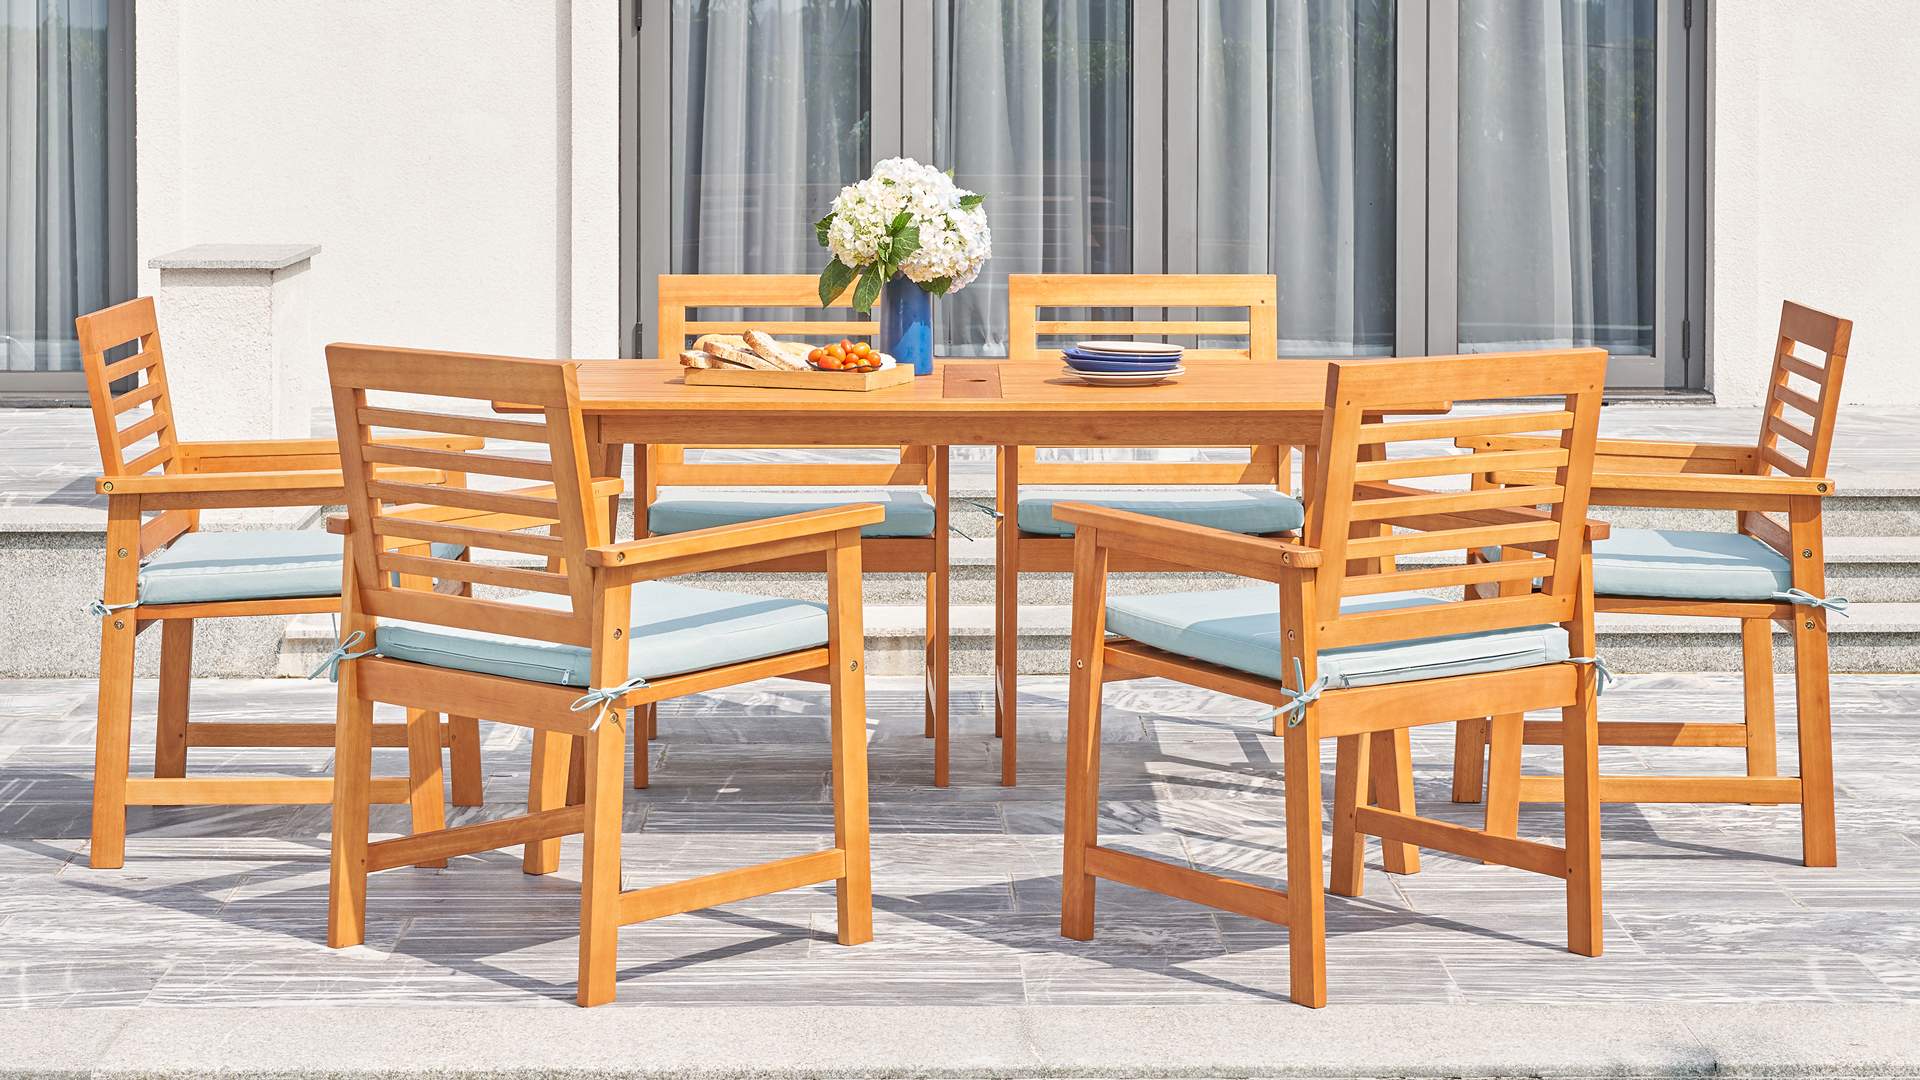 Set of 6 chairs + 1 table